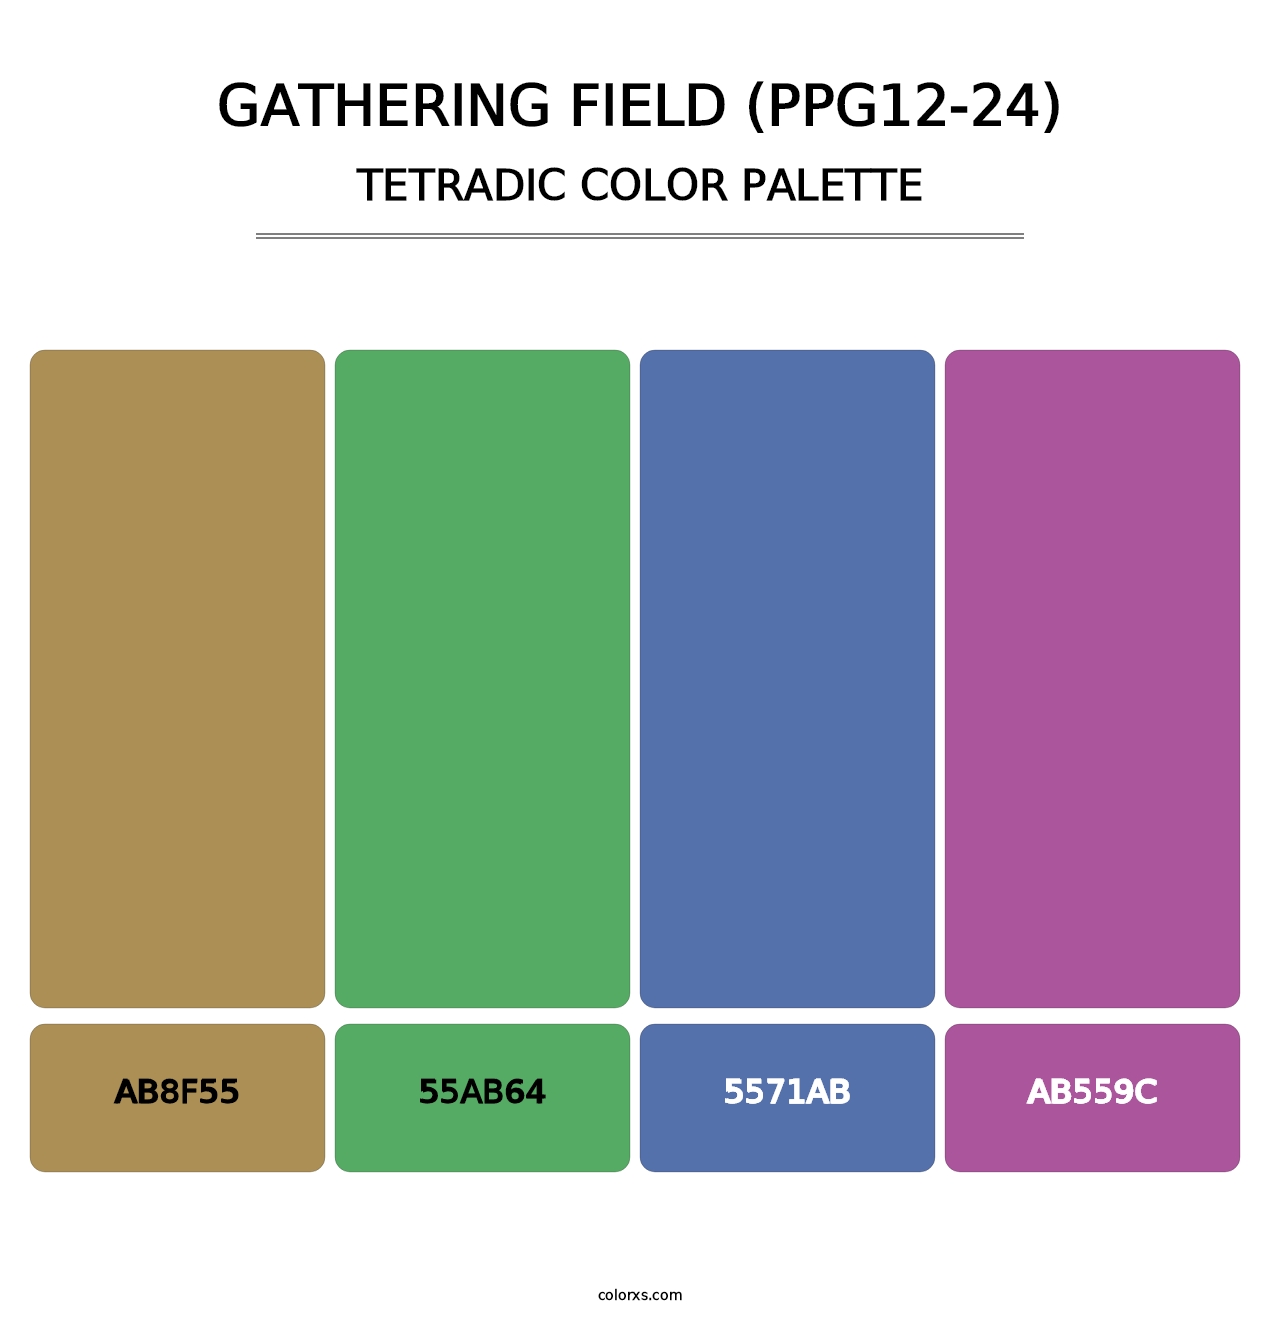 Gathering Field (PPG12-24) - Tetradic Color Palette